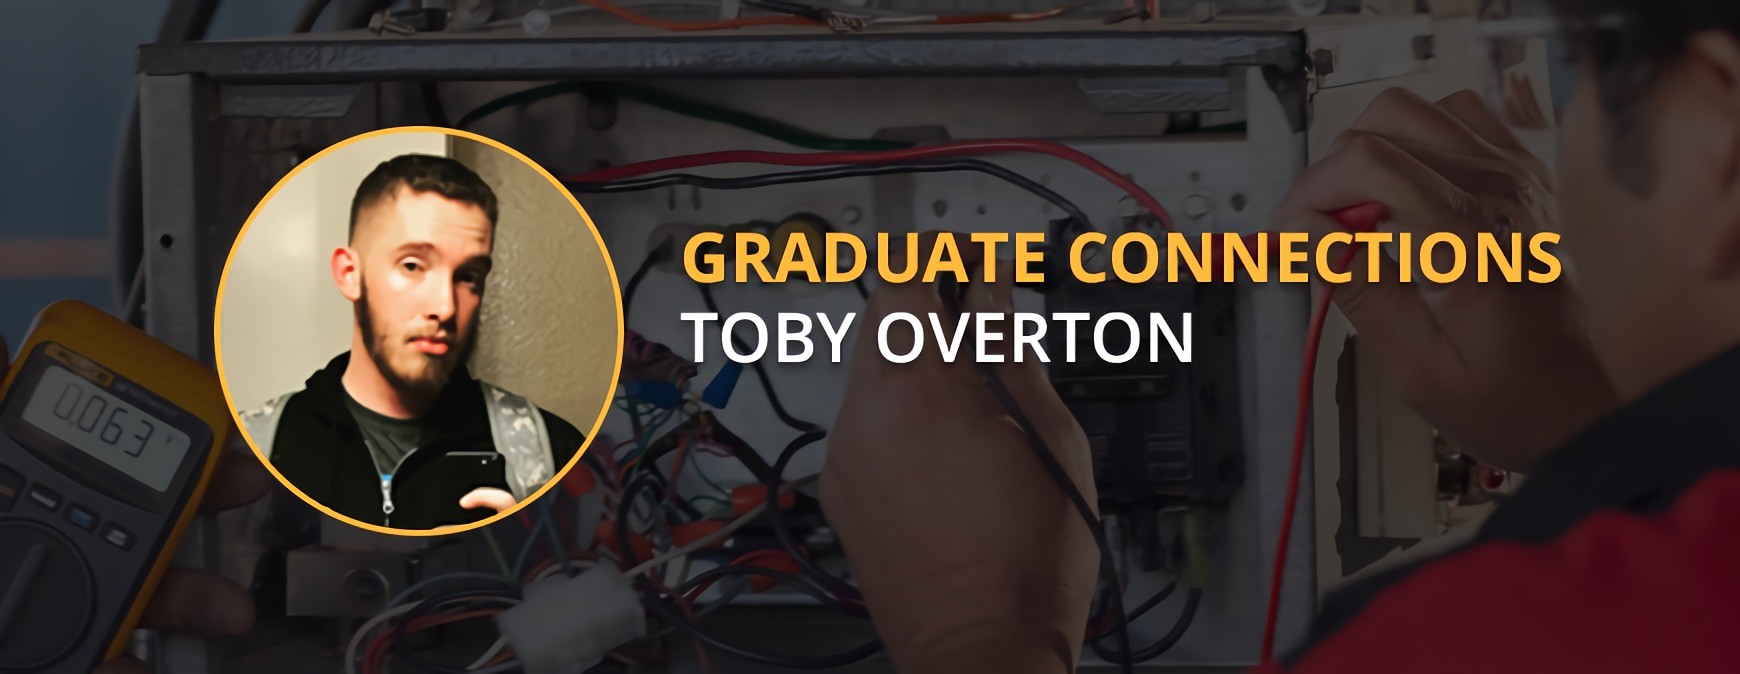 Toby Overton Graduate Connection